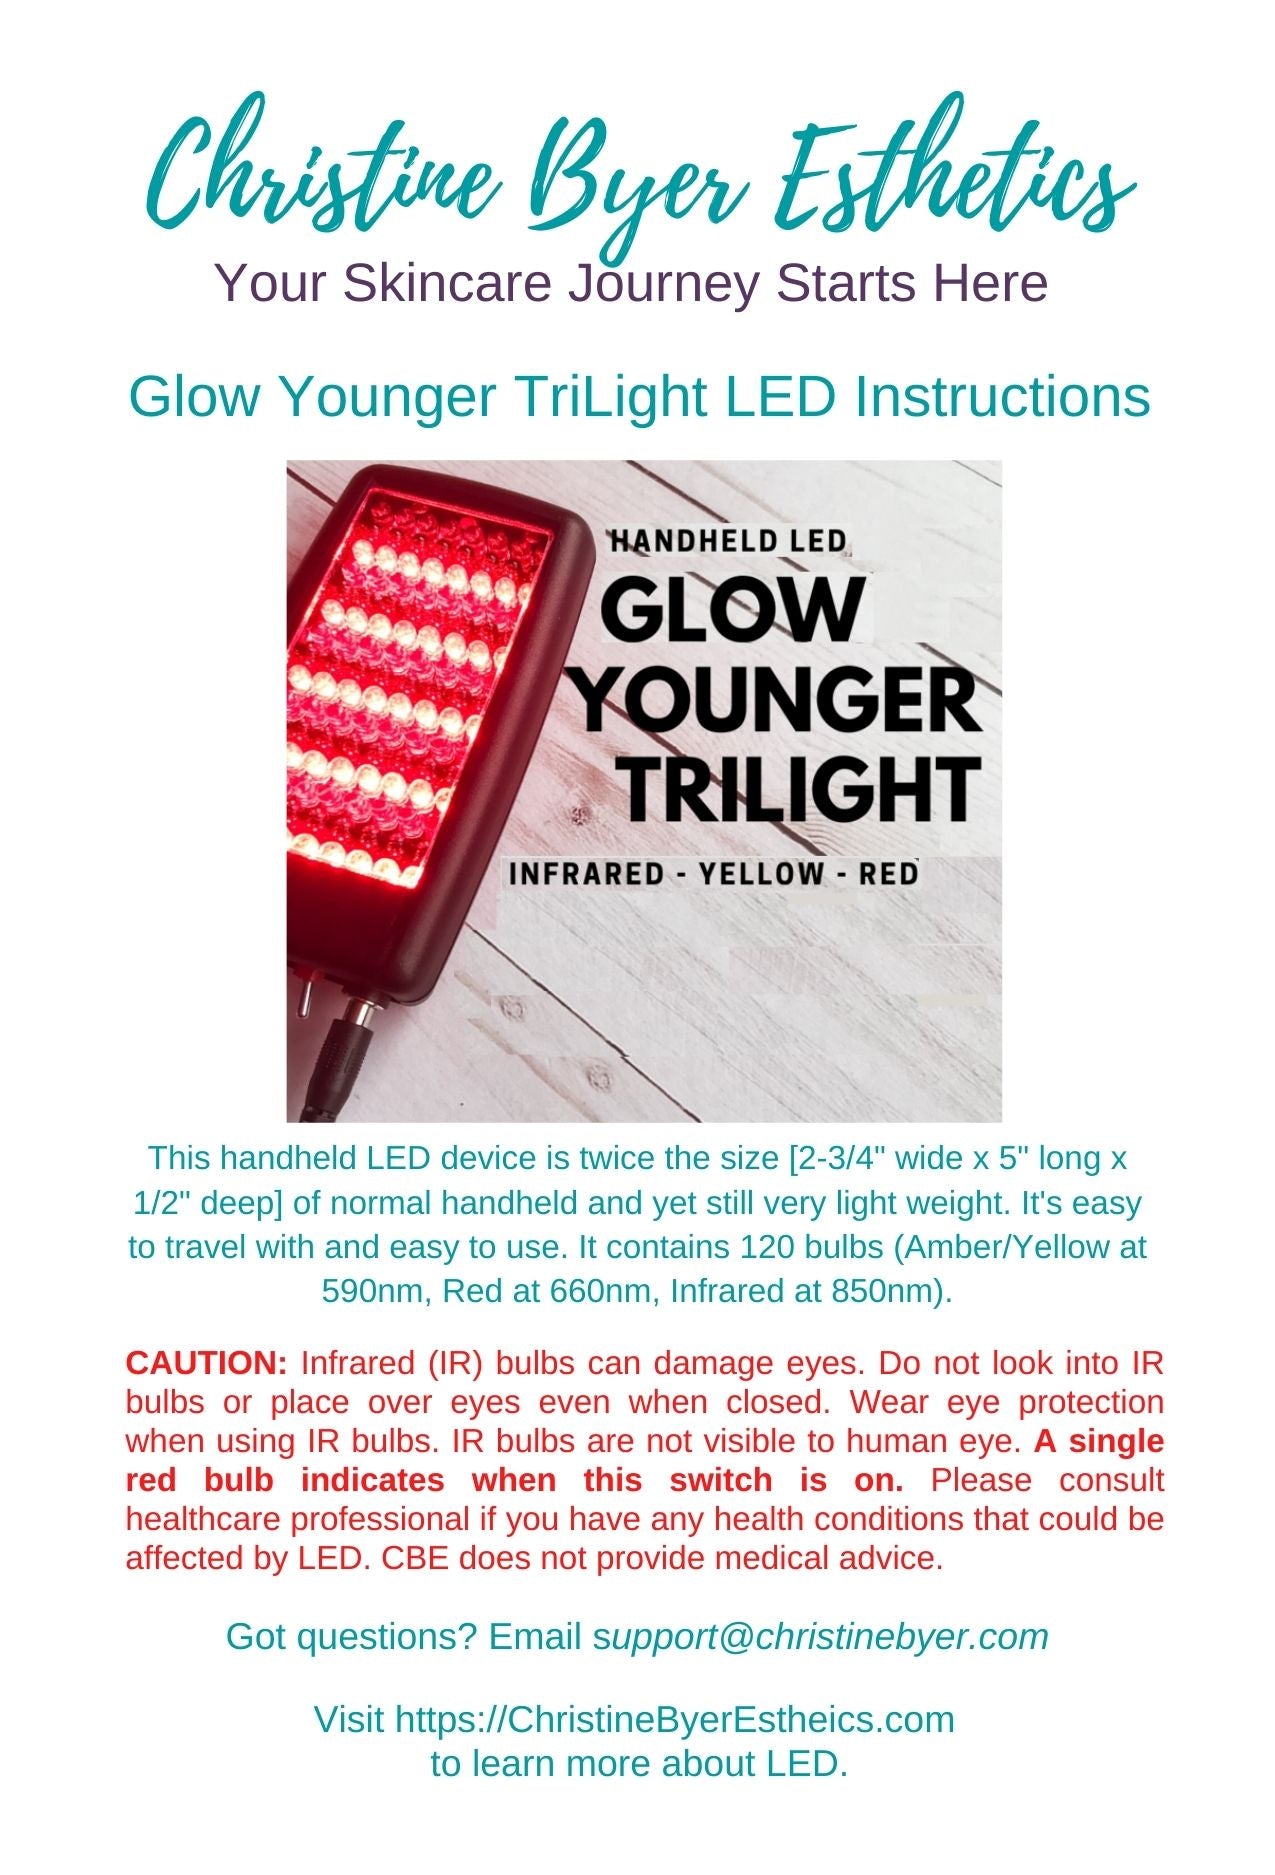 Glow Younger TriLight LED Device more info